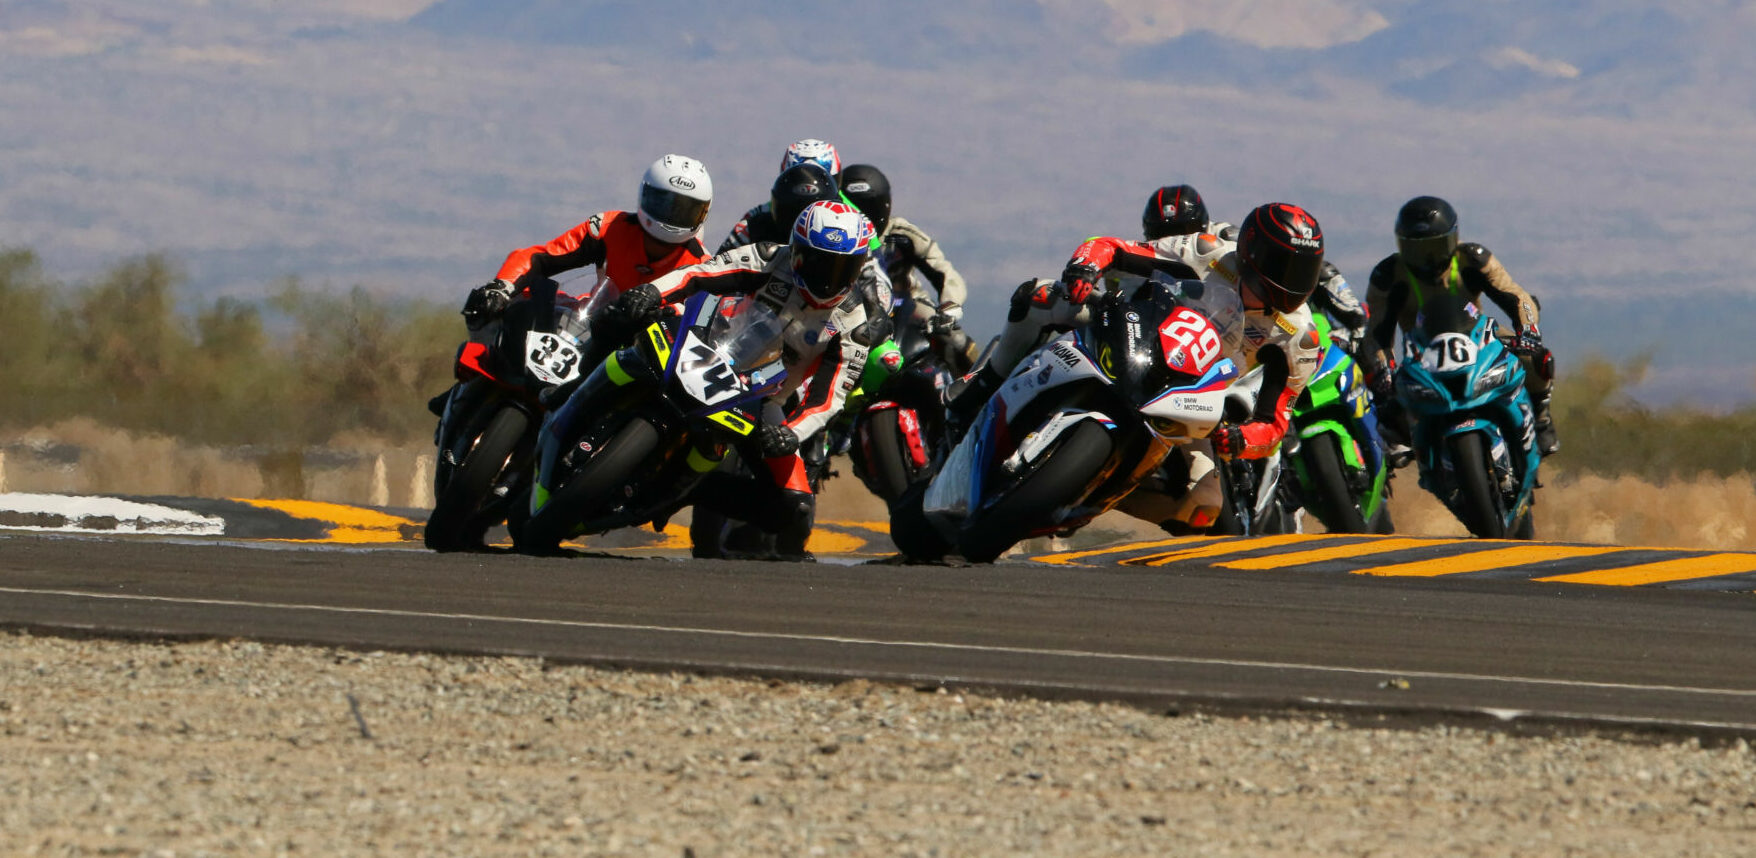 Eventual race winner Jack Bakken (29) leads Bryce Prince (74), Wes Farnsworth (33), and the rest of the field early in the CVMA Stock 1000 Shootout at Chuckwalla Raceway. Photo by CaliPhotography.com, courtesy CVMA.